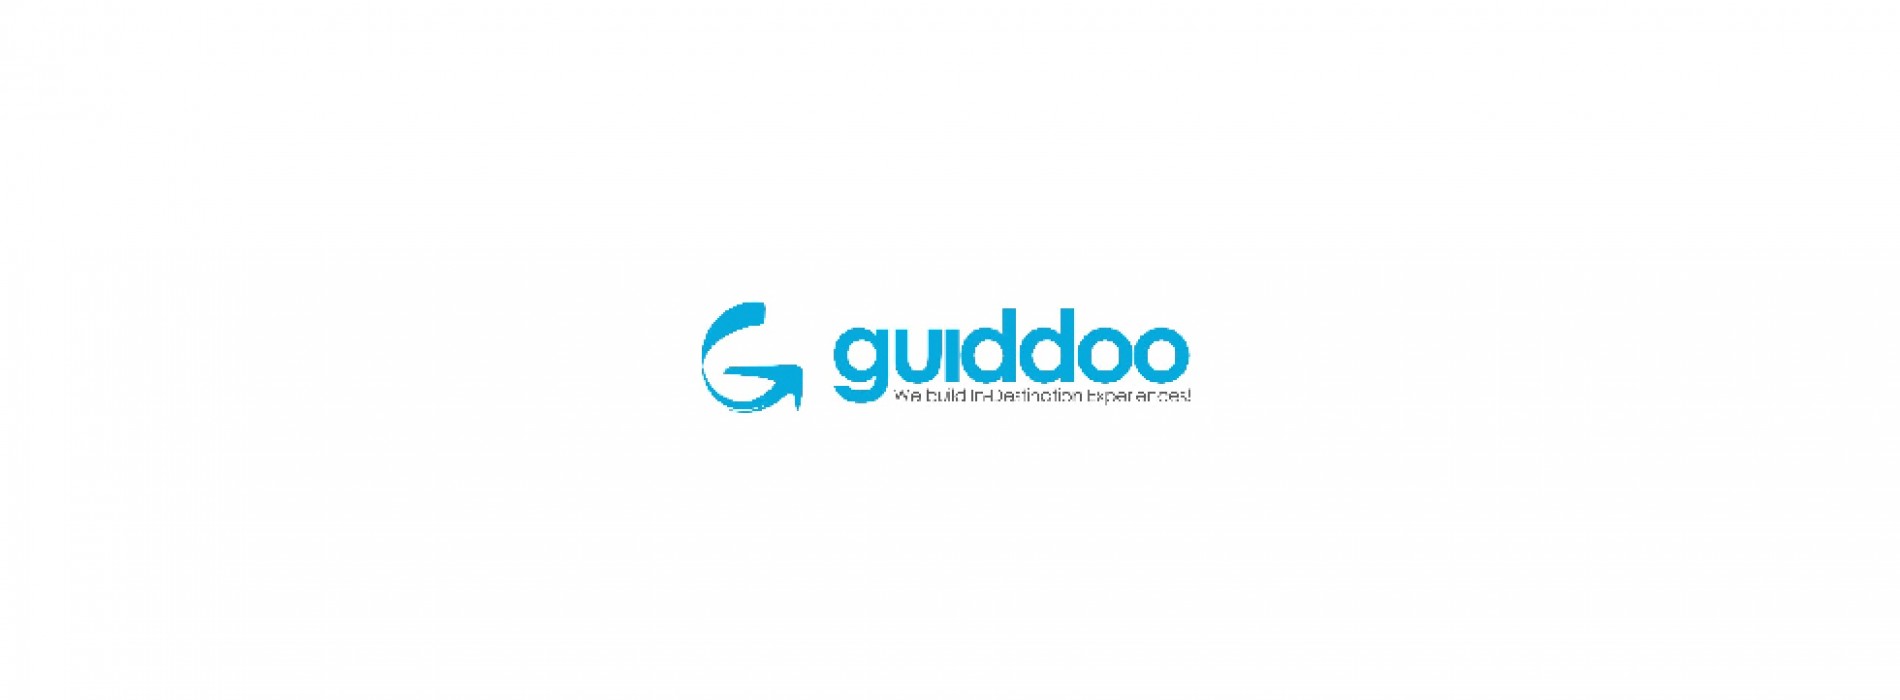 Guiddoo, India’s leading In-Destination App raises USD 300,000 in Pre-Series a funding